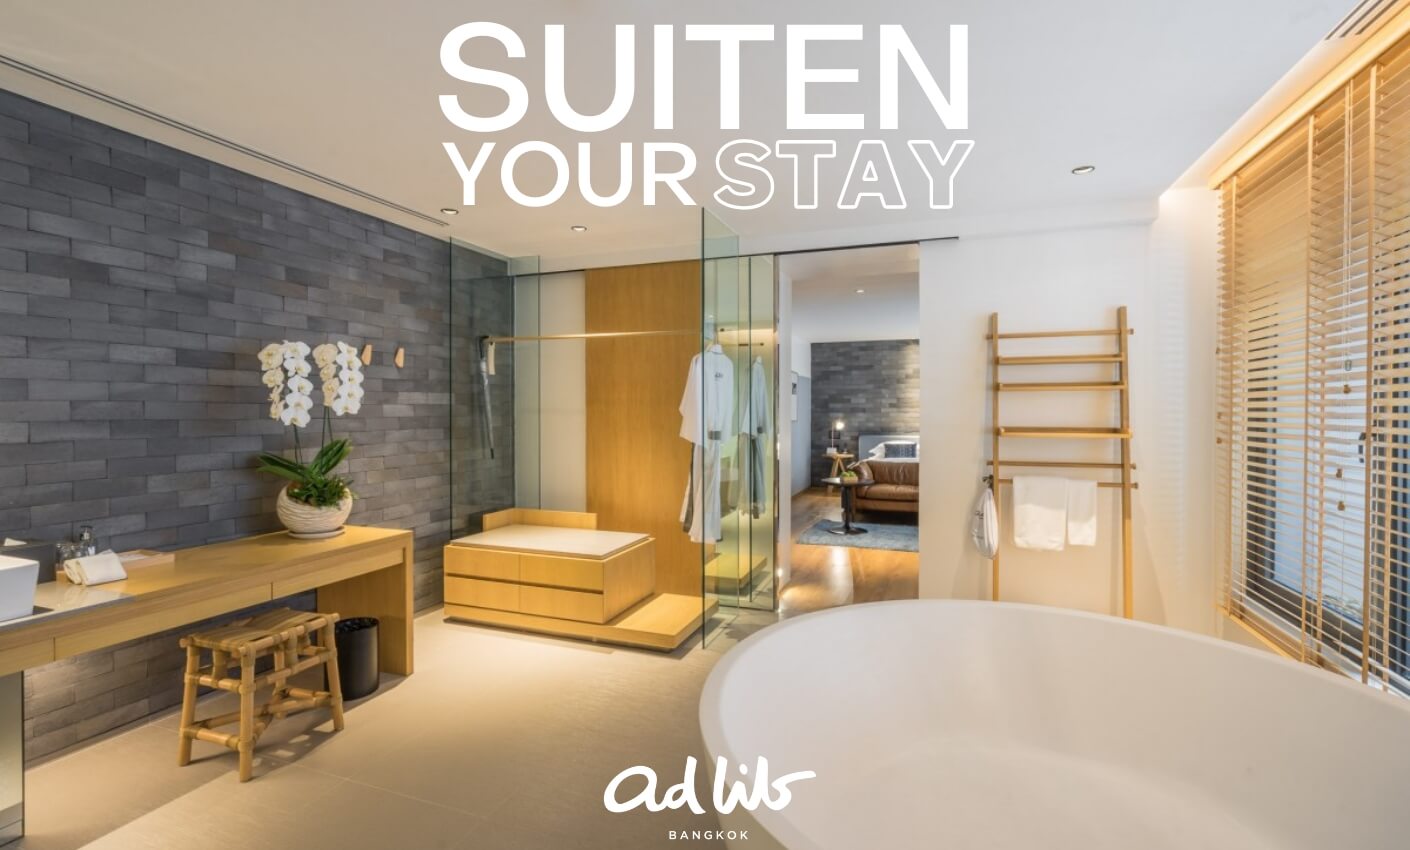 Suiten Your Stay with up to 20% off!